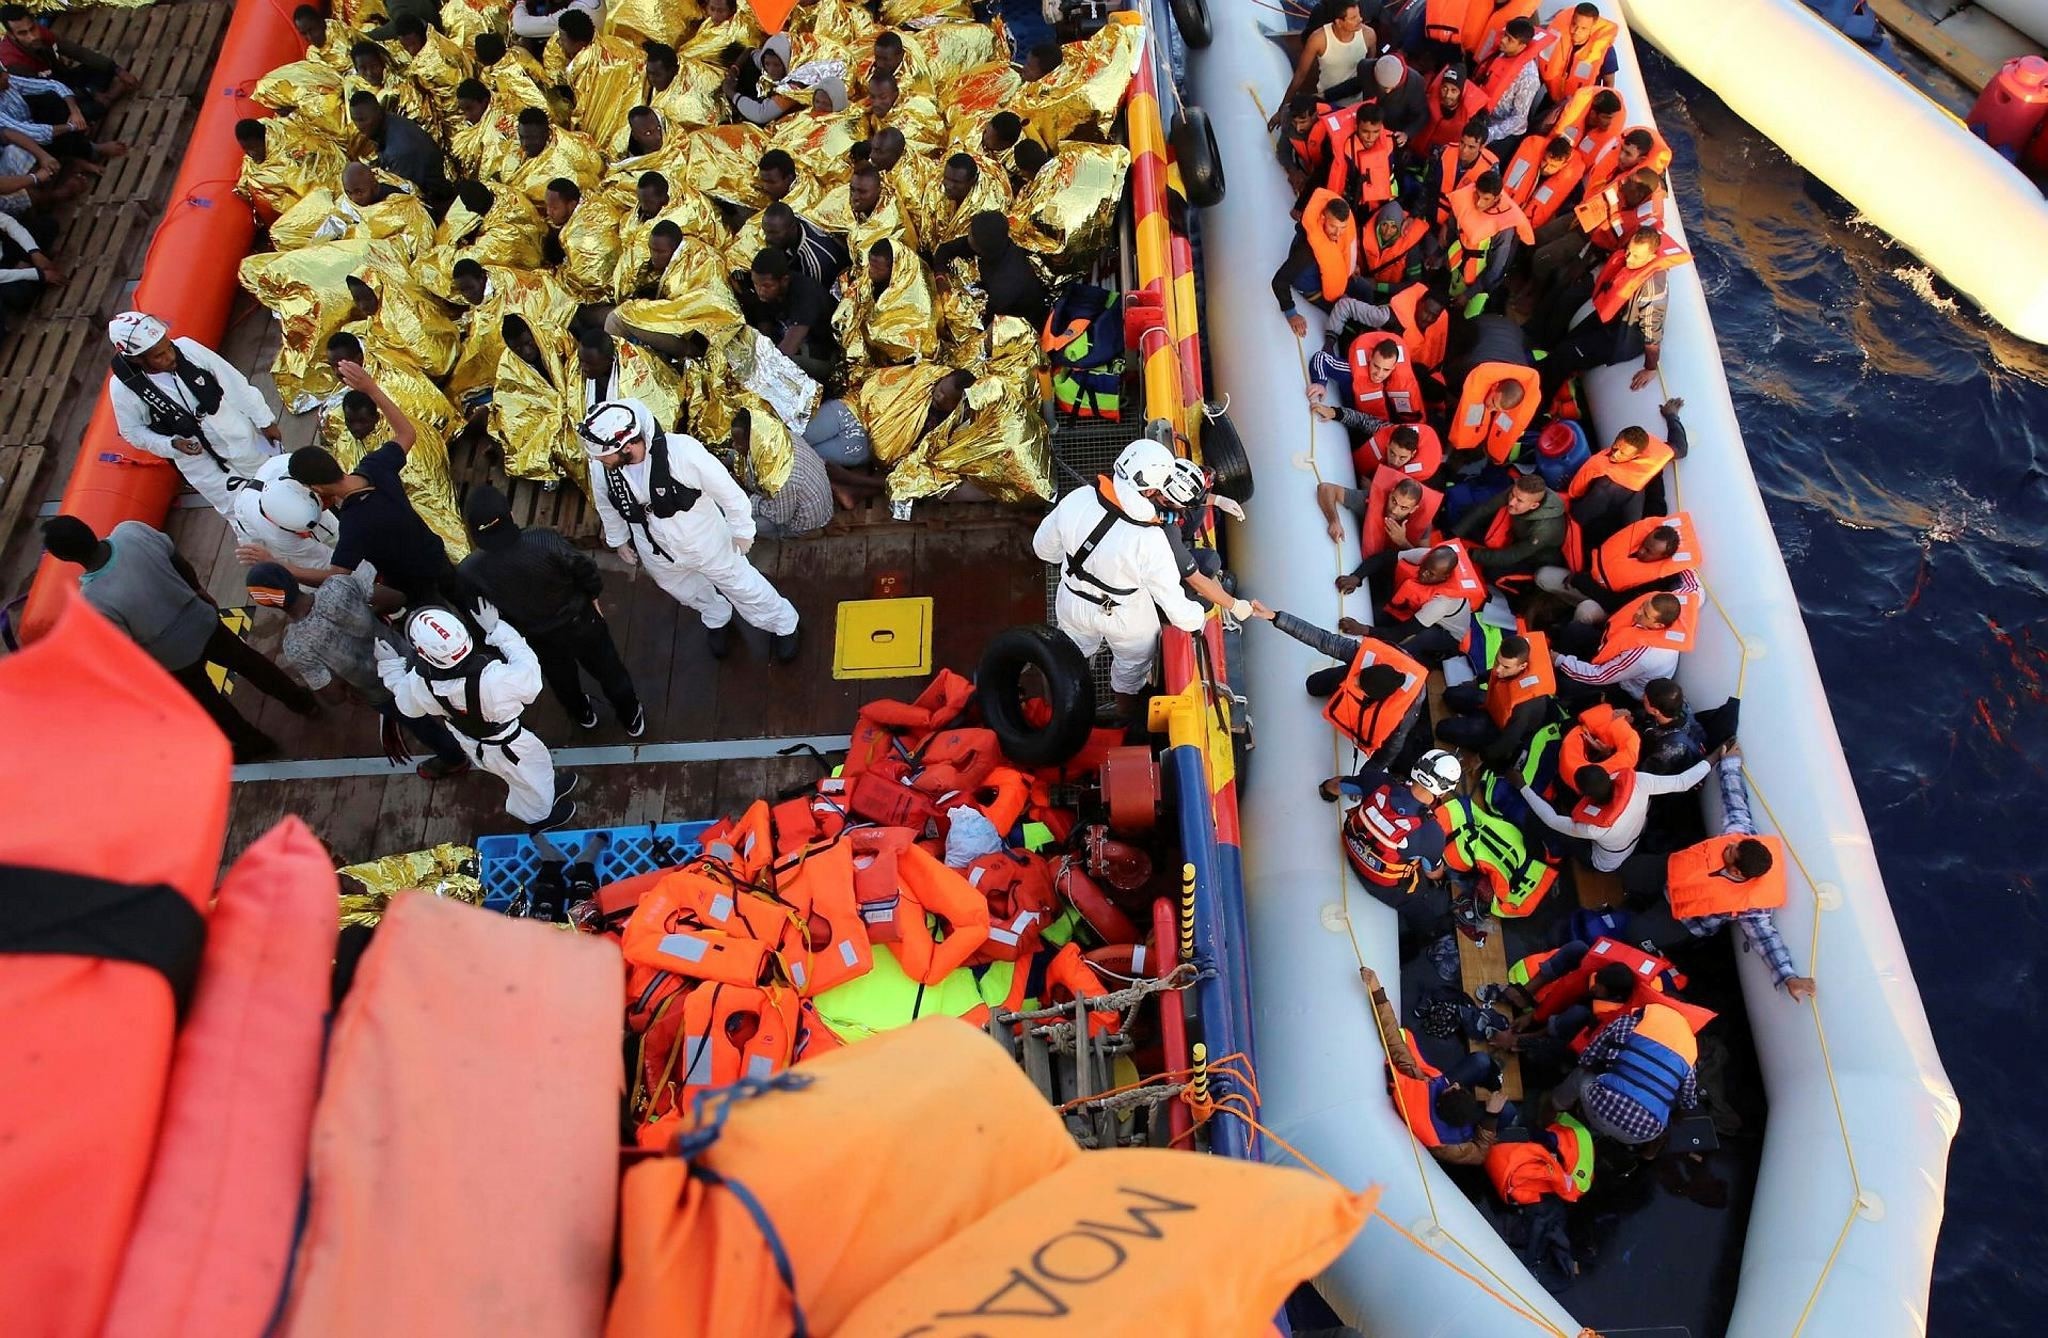 Migrants cover themselves with emergency blankets after being rescued by the vessel Responder. (AP Photo)